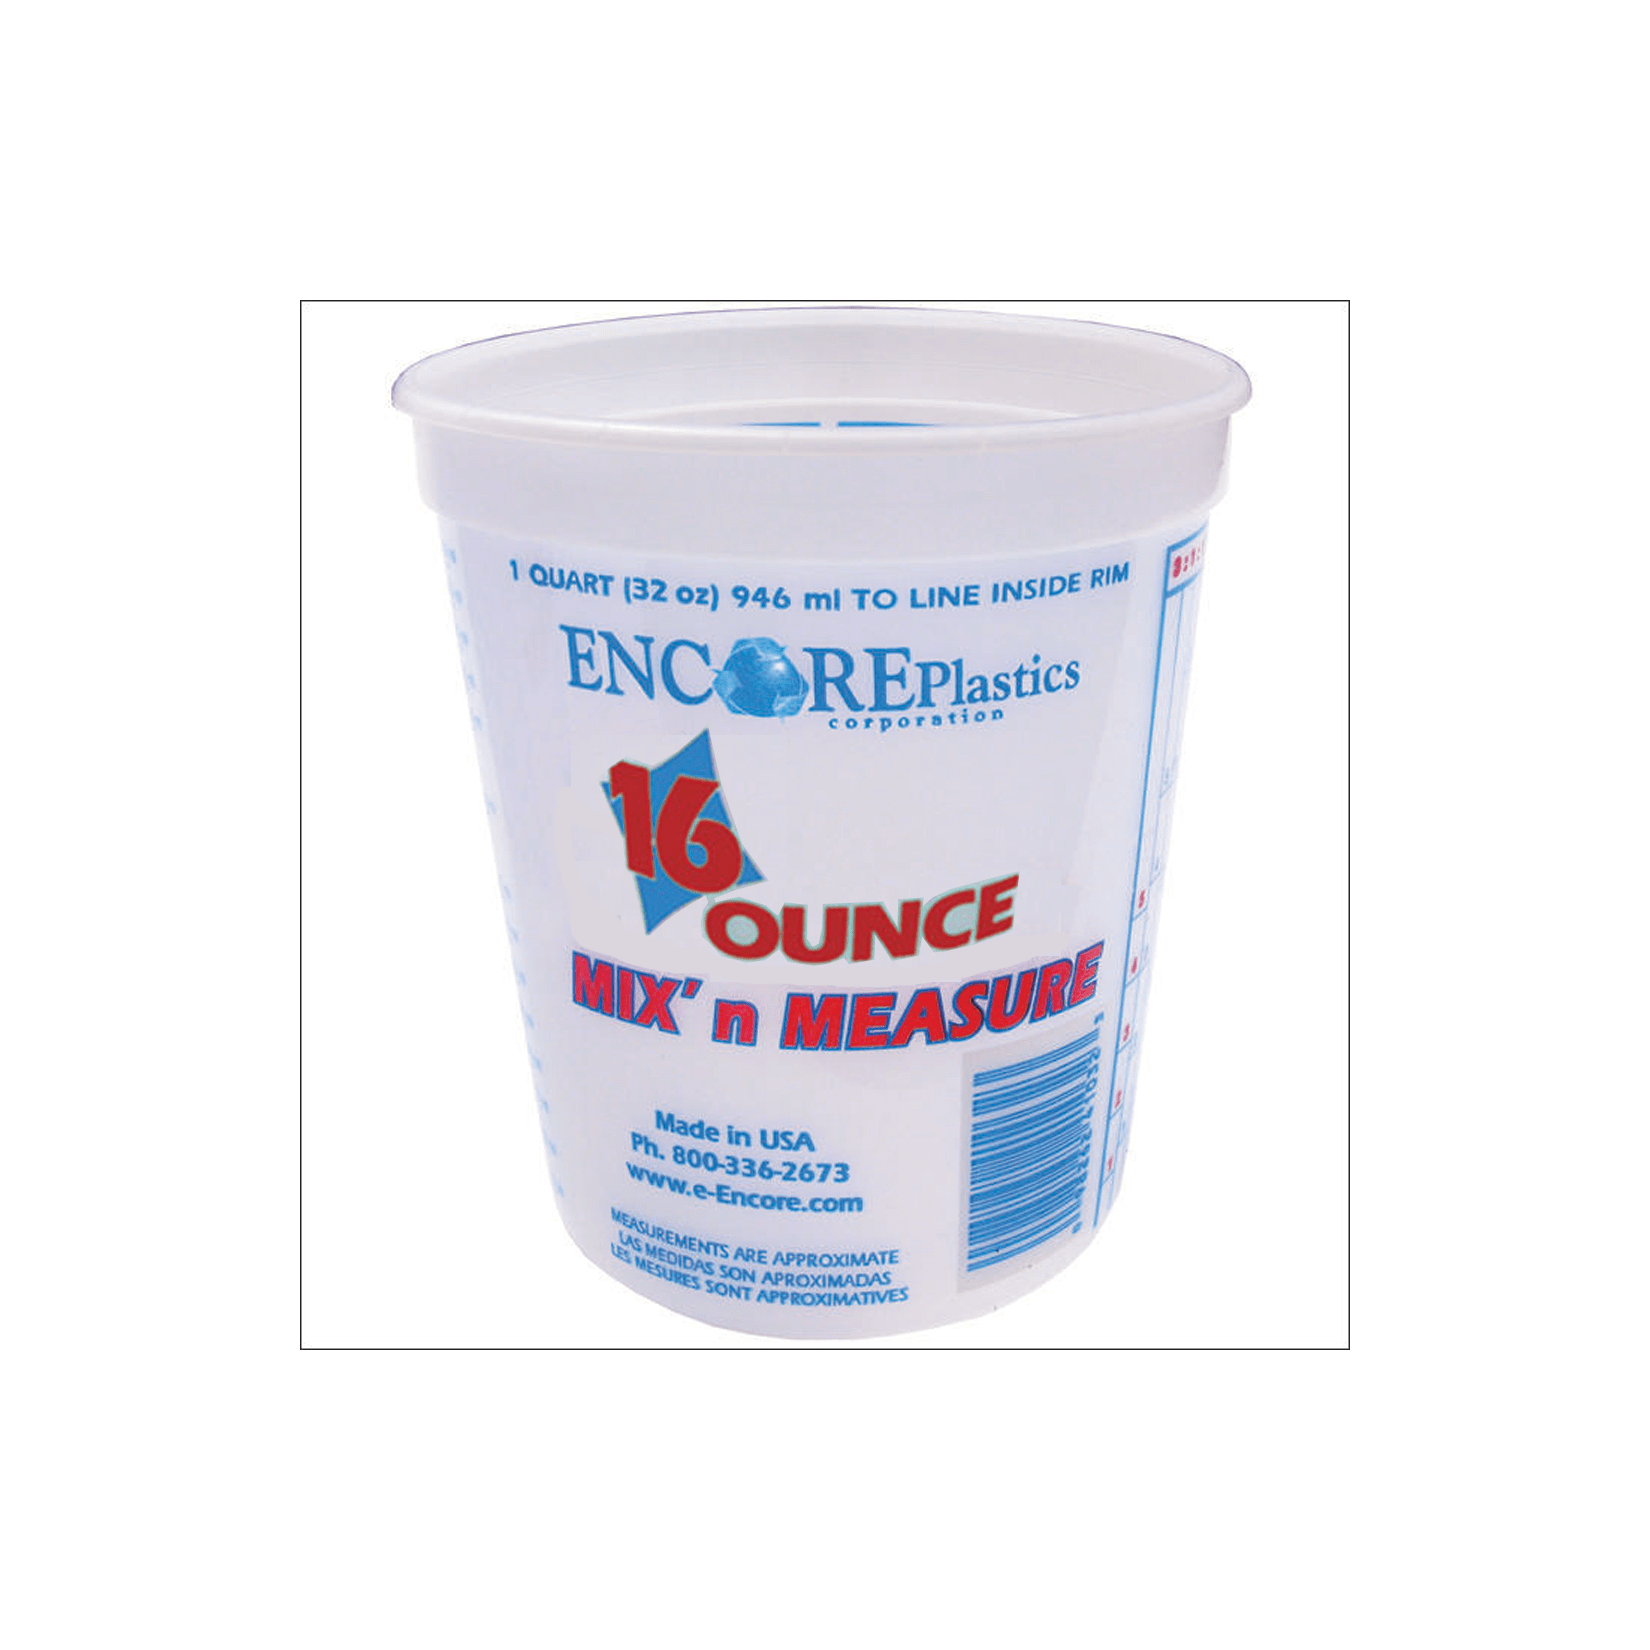  (Full Case of 100 Each - Pint (16oz) Paint Mixing Cups